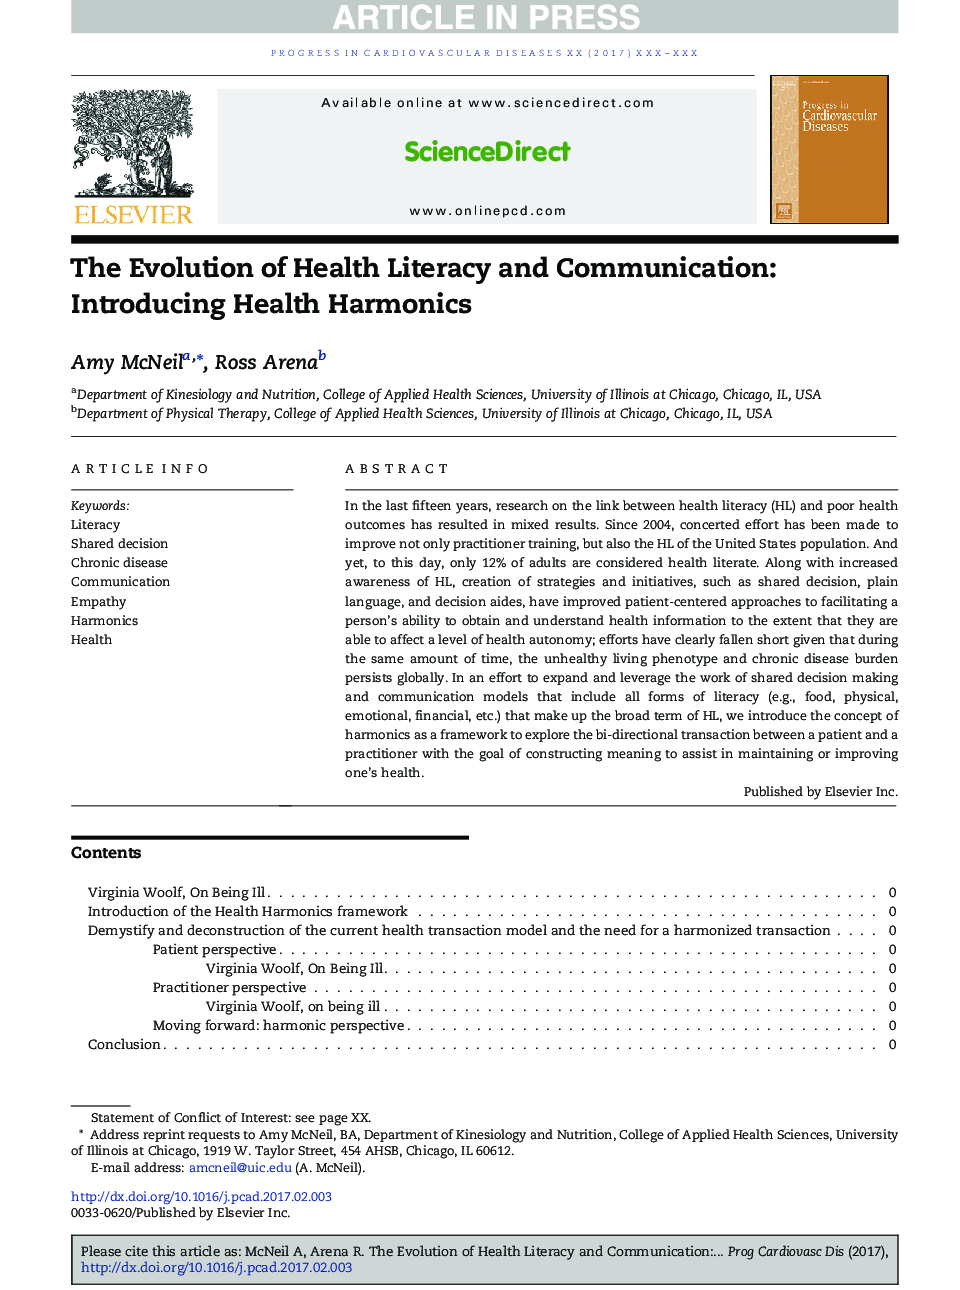 The Evolution of Health Literacy and Communication: Introducing Health Harmonics